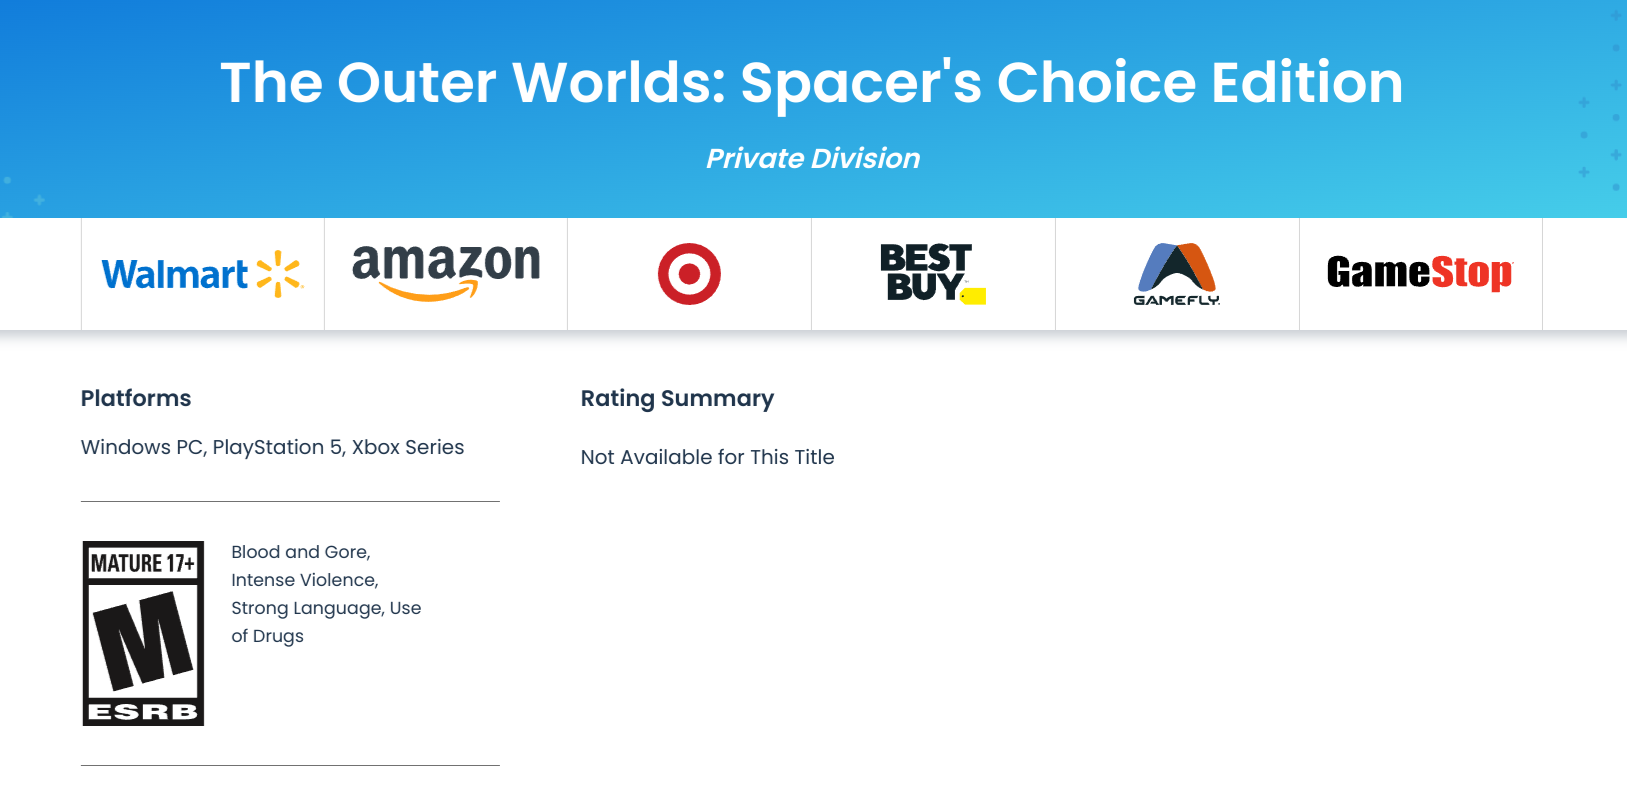 ESRB Rating for The Outer Worlds: Spacers Choice Edition